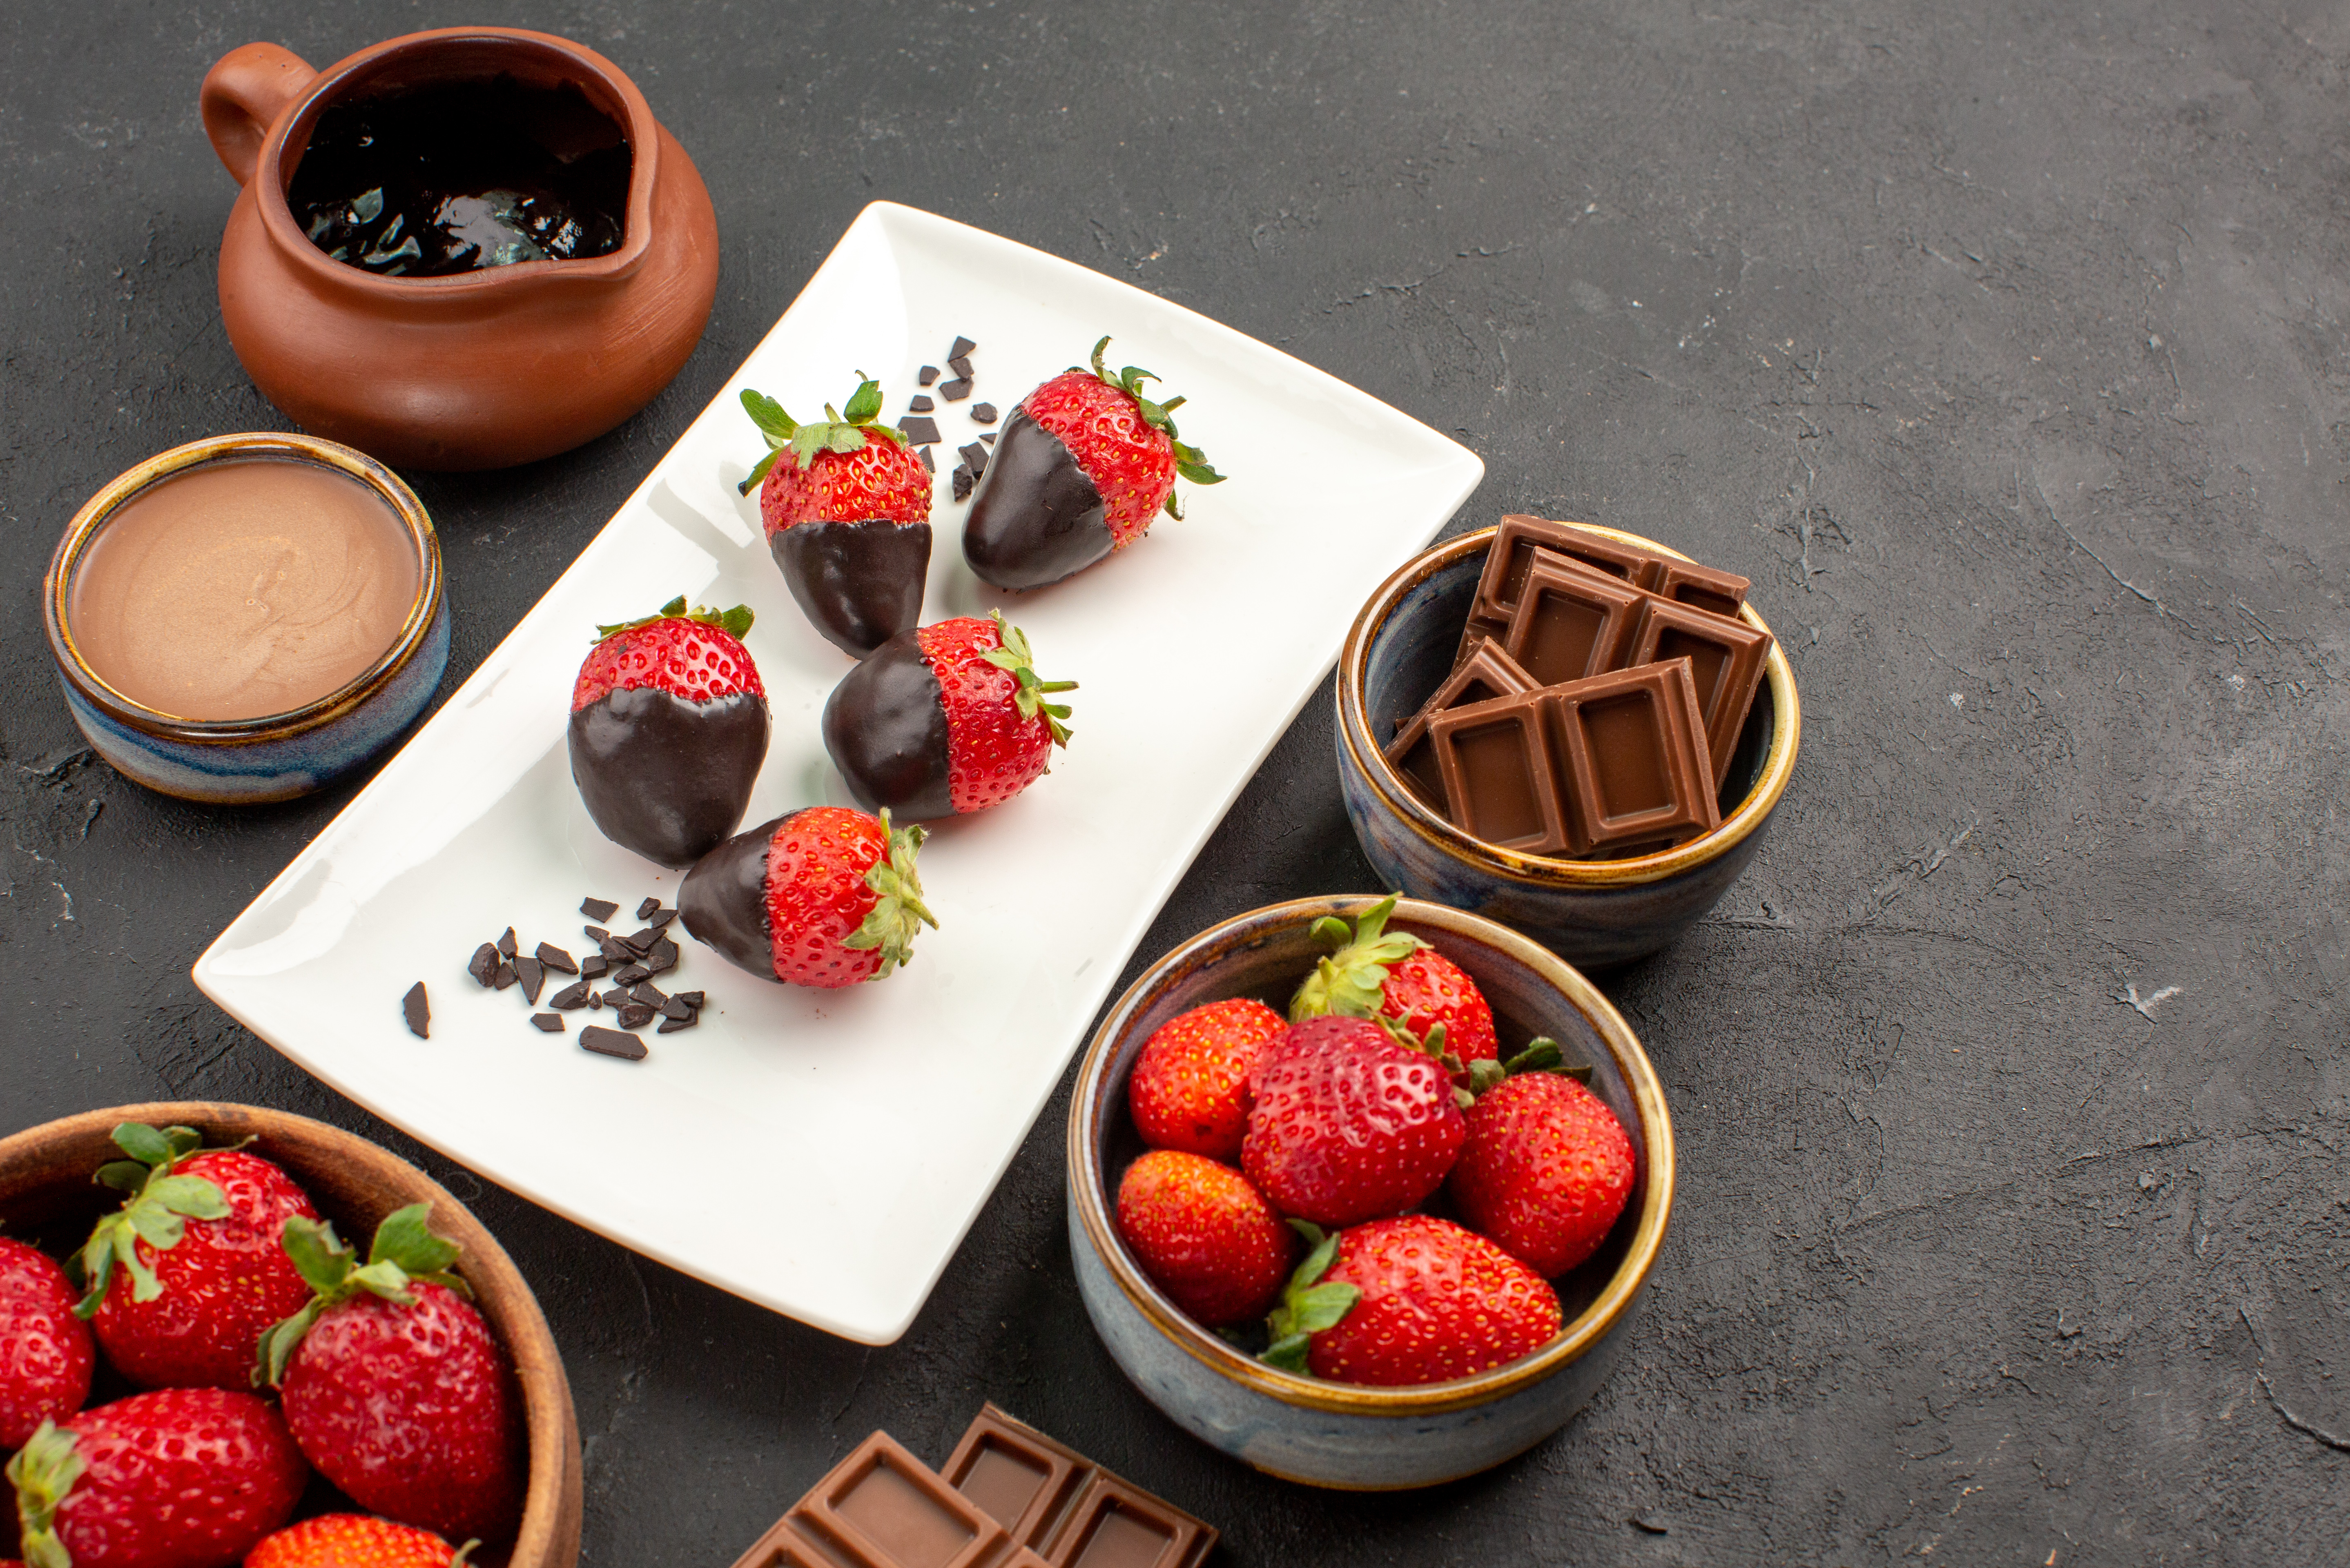 side-close-up-view-chocolate-bowl-red-strawberries-chocolate-cream-bowl-white-plate-chocolate-covered-strawberries-dark-table